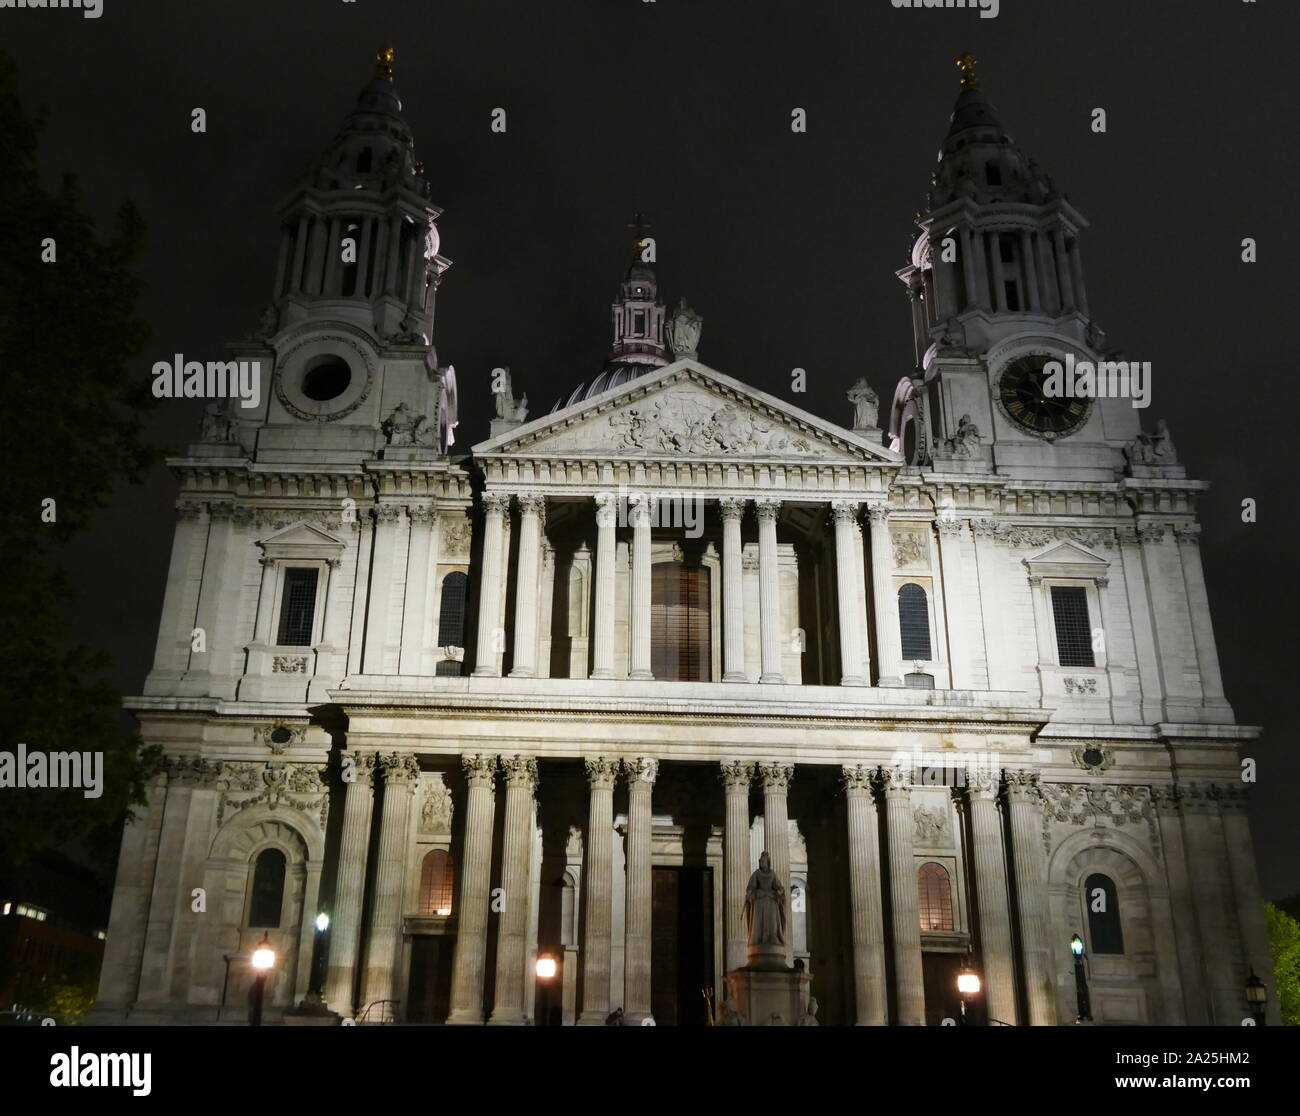 St Paul's Cathedral, London, is an Anglican cathedral, the seat of the Bishop of London and the mother church of the Diocese of London. The cathedral, dating from the late 17th century, was designed in the English Baroque style by Sir Christopher Wren. Stock Photo